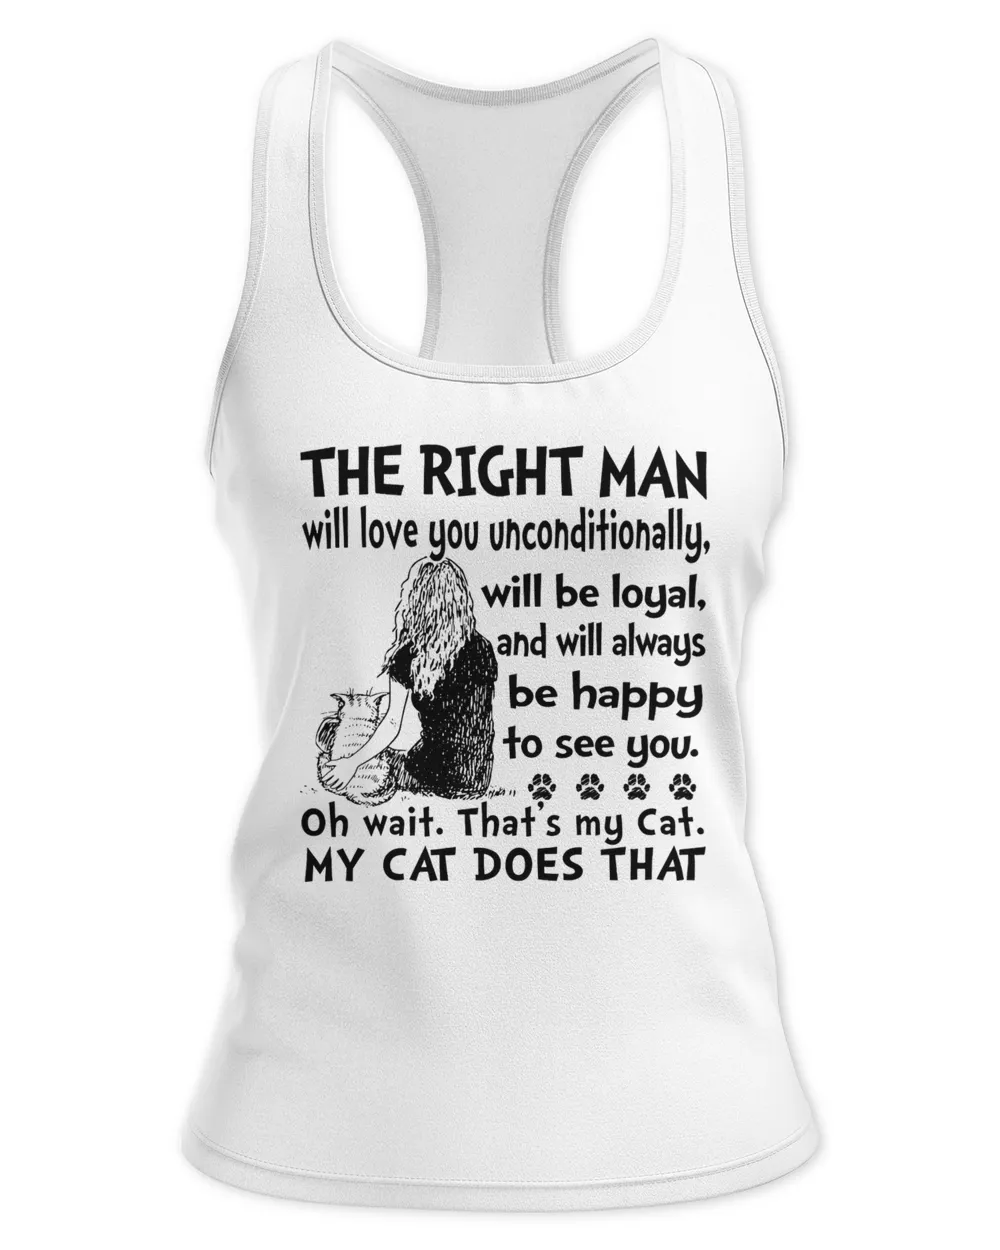 The right man will love you My Cat Does That